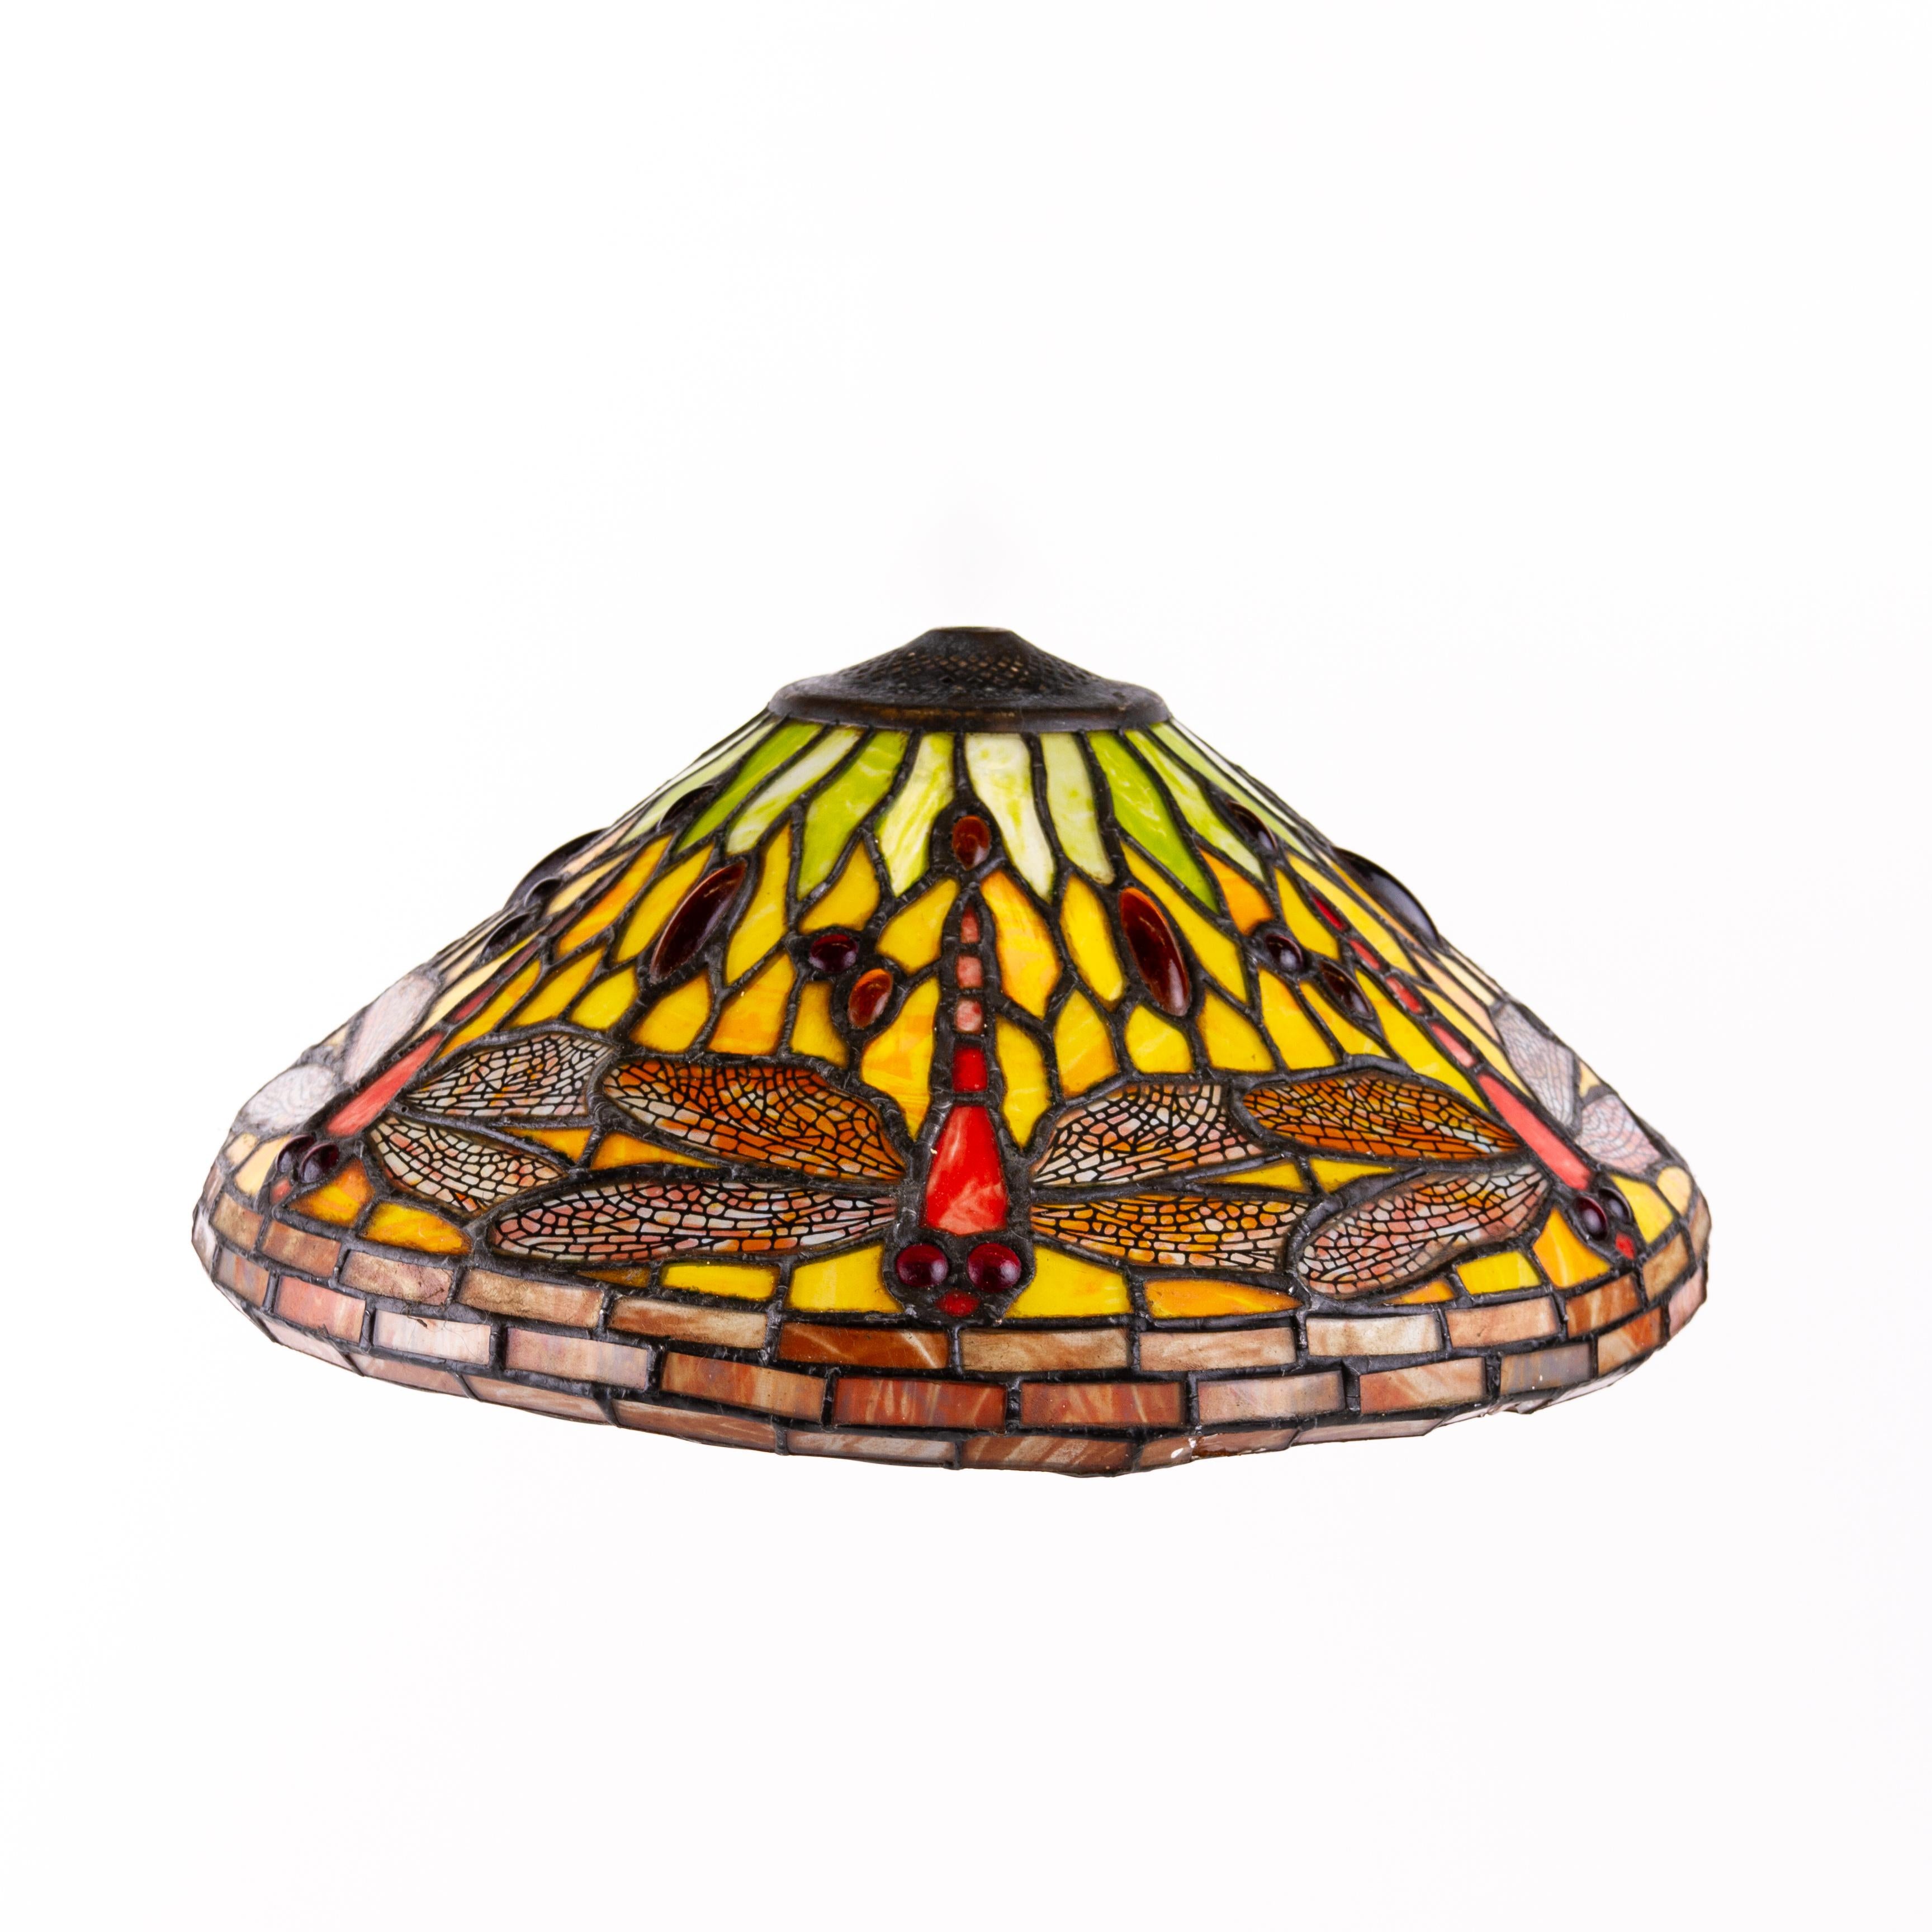 Tiffany Style Stained-Glass Dragonfly Lamp Shade
Good condition

Free international shipping.